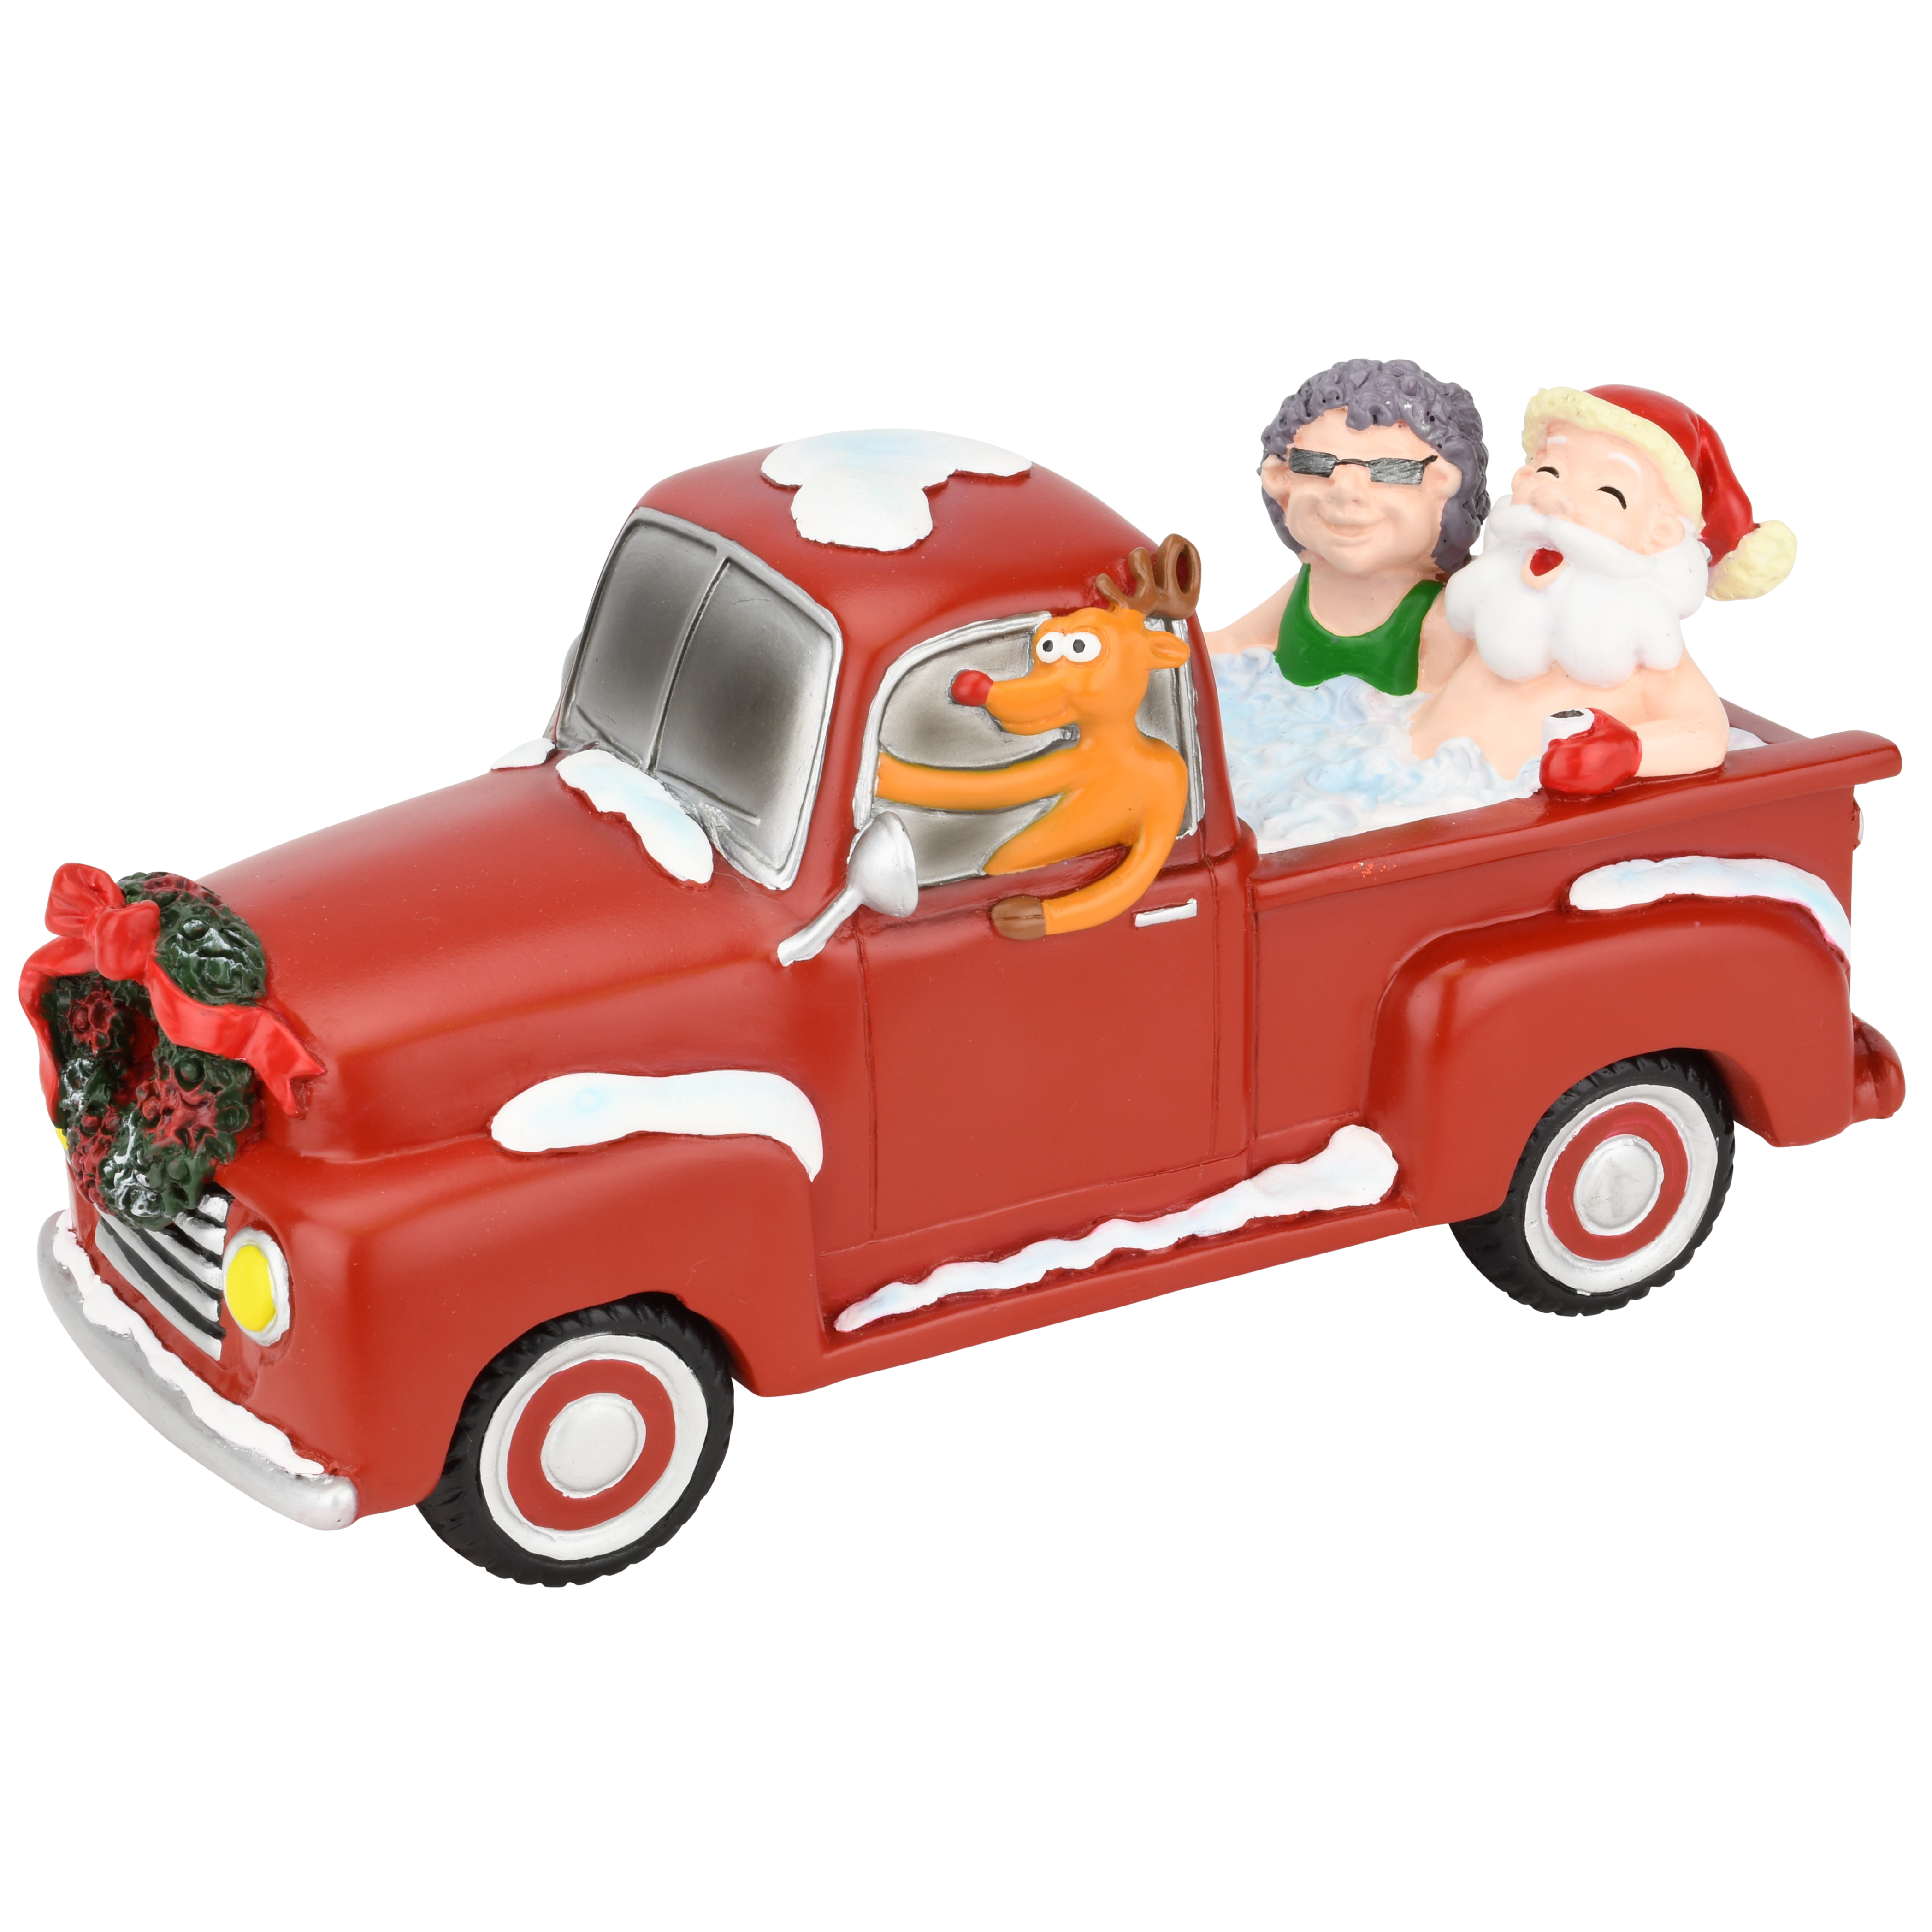 30% Off Sale! - Santa and Mrs. Claus Partying Pickup Truck 'Hillbilly' Hot Tub 8